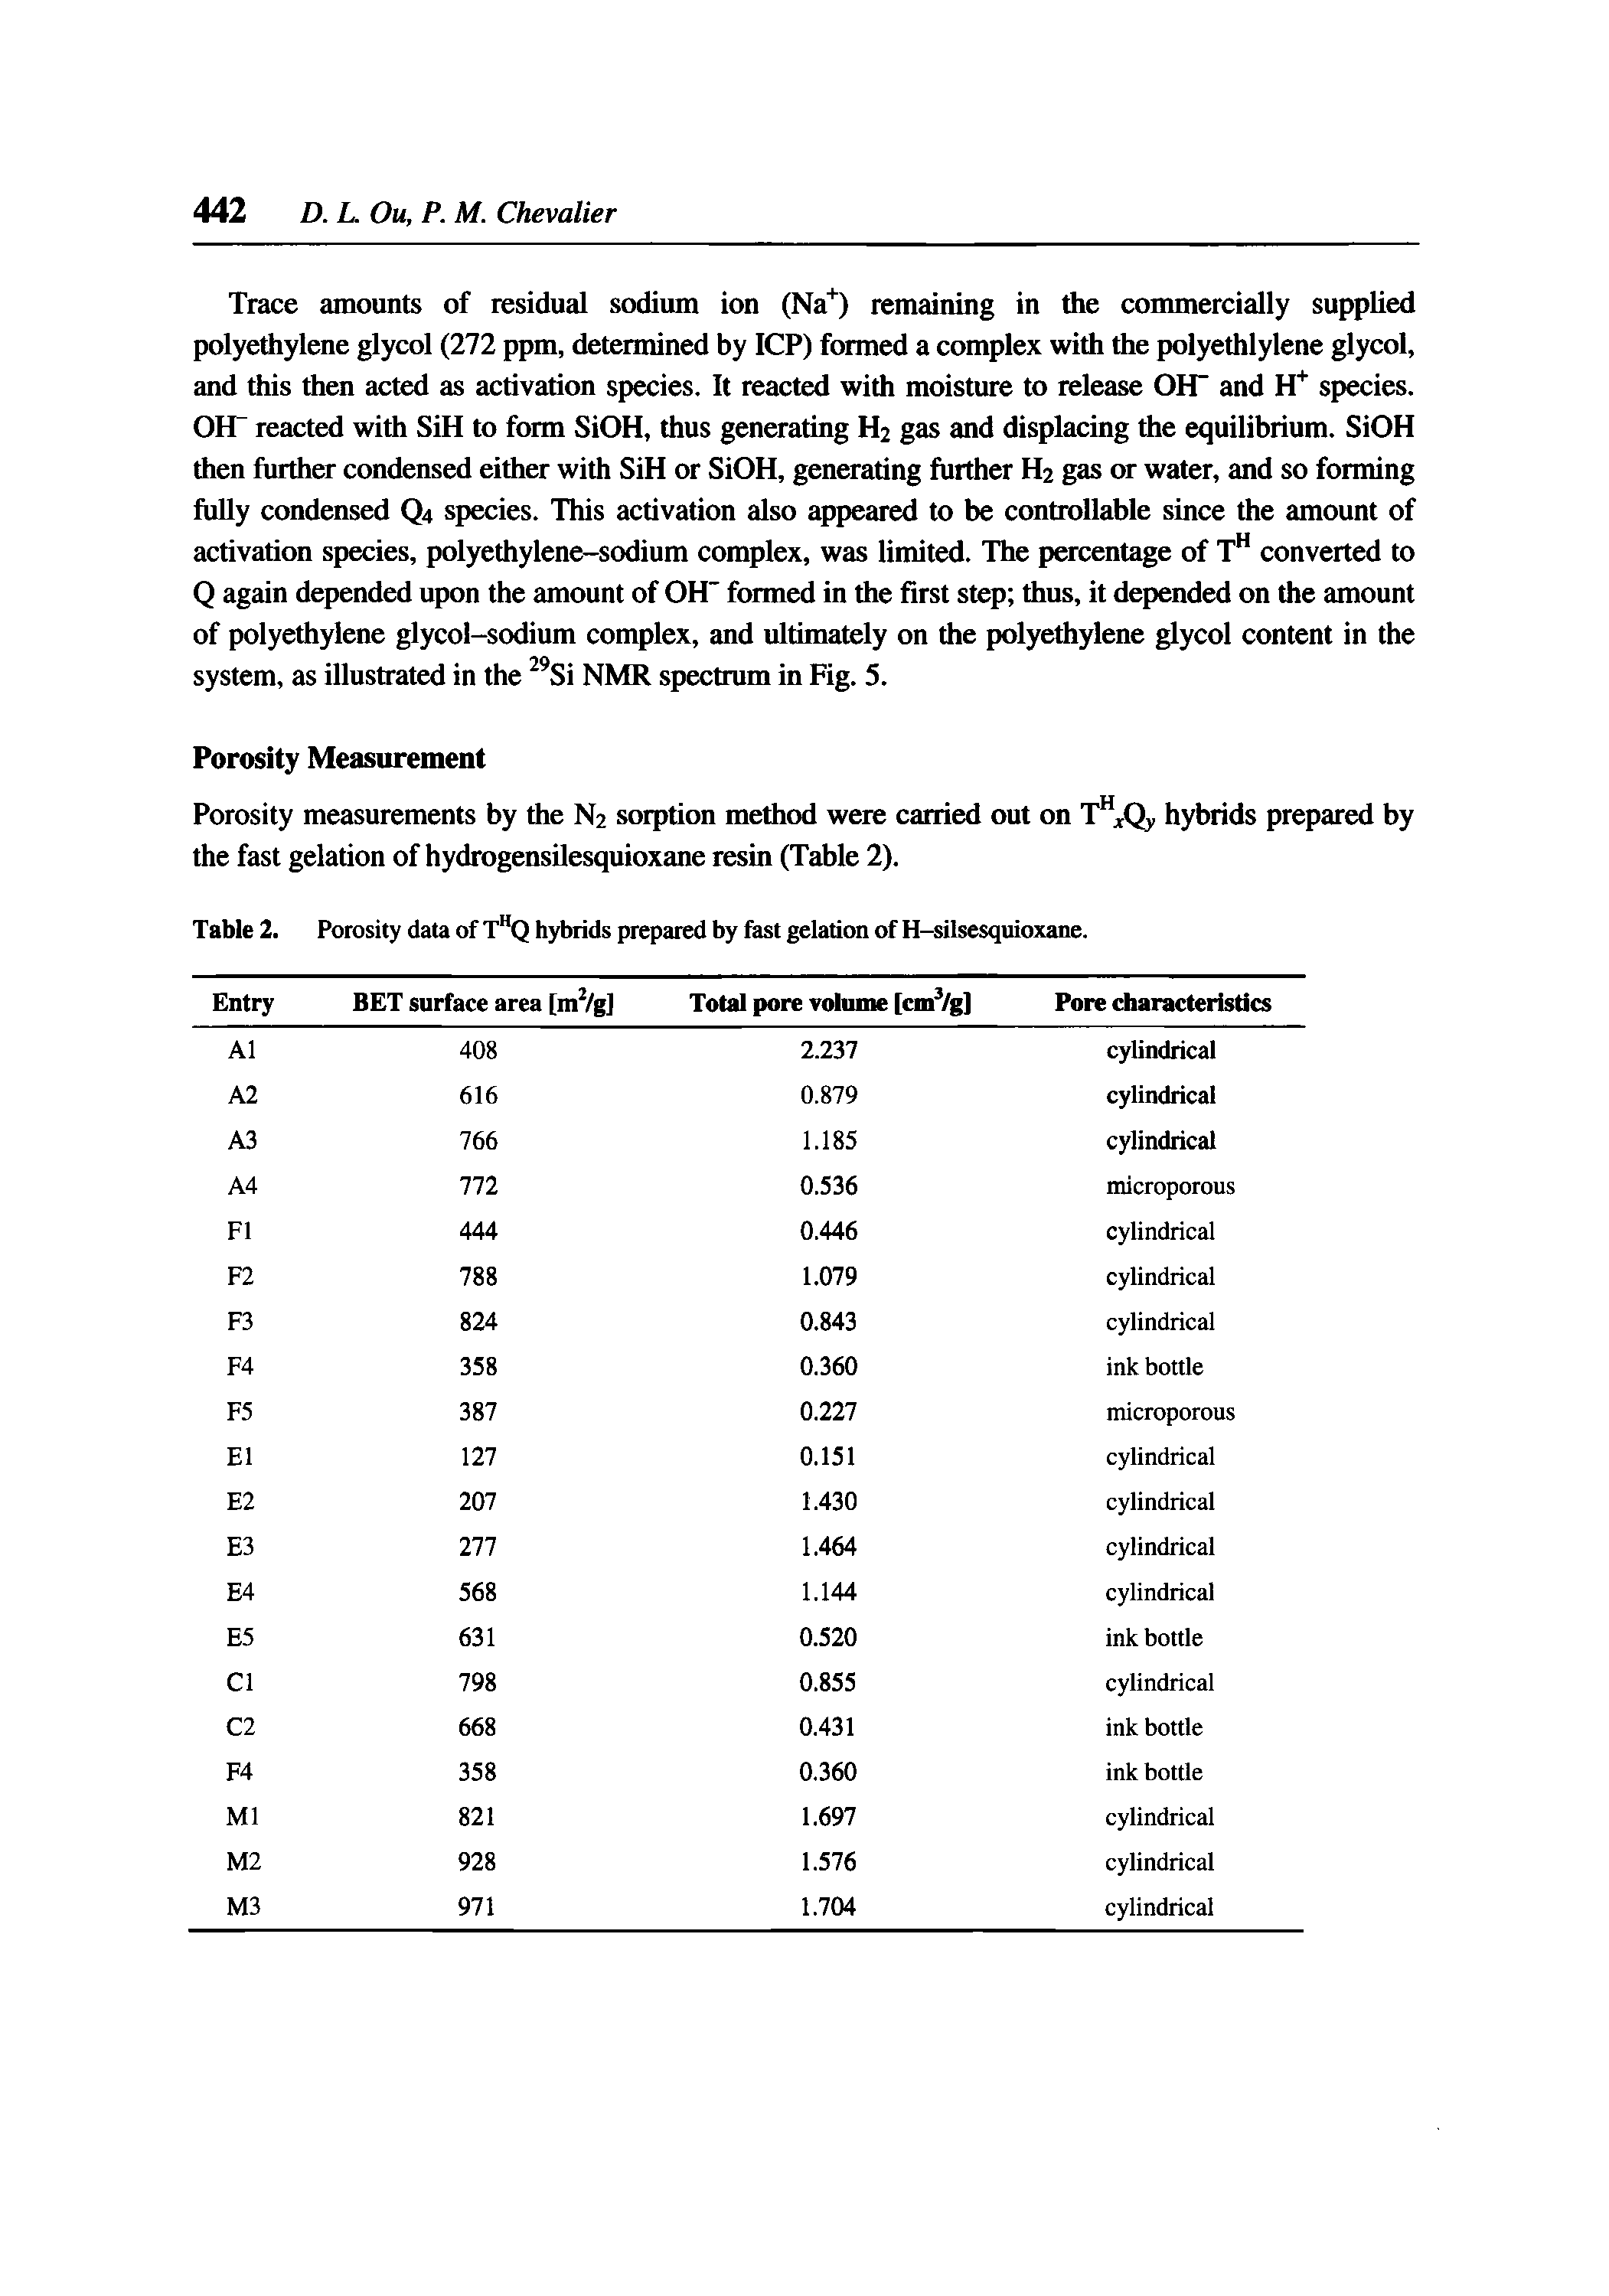 Table 2. Porosity data of T"Q hybrids prepared by fast gelation of H-silsesquioxane.